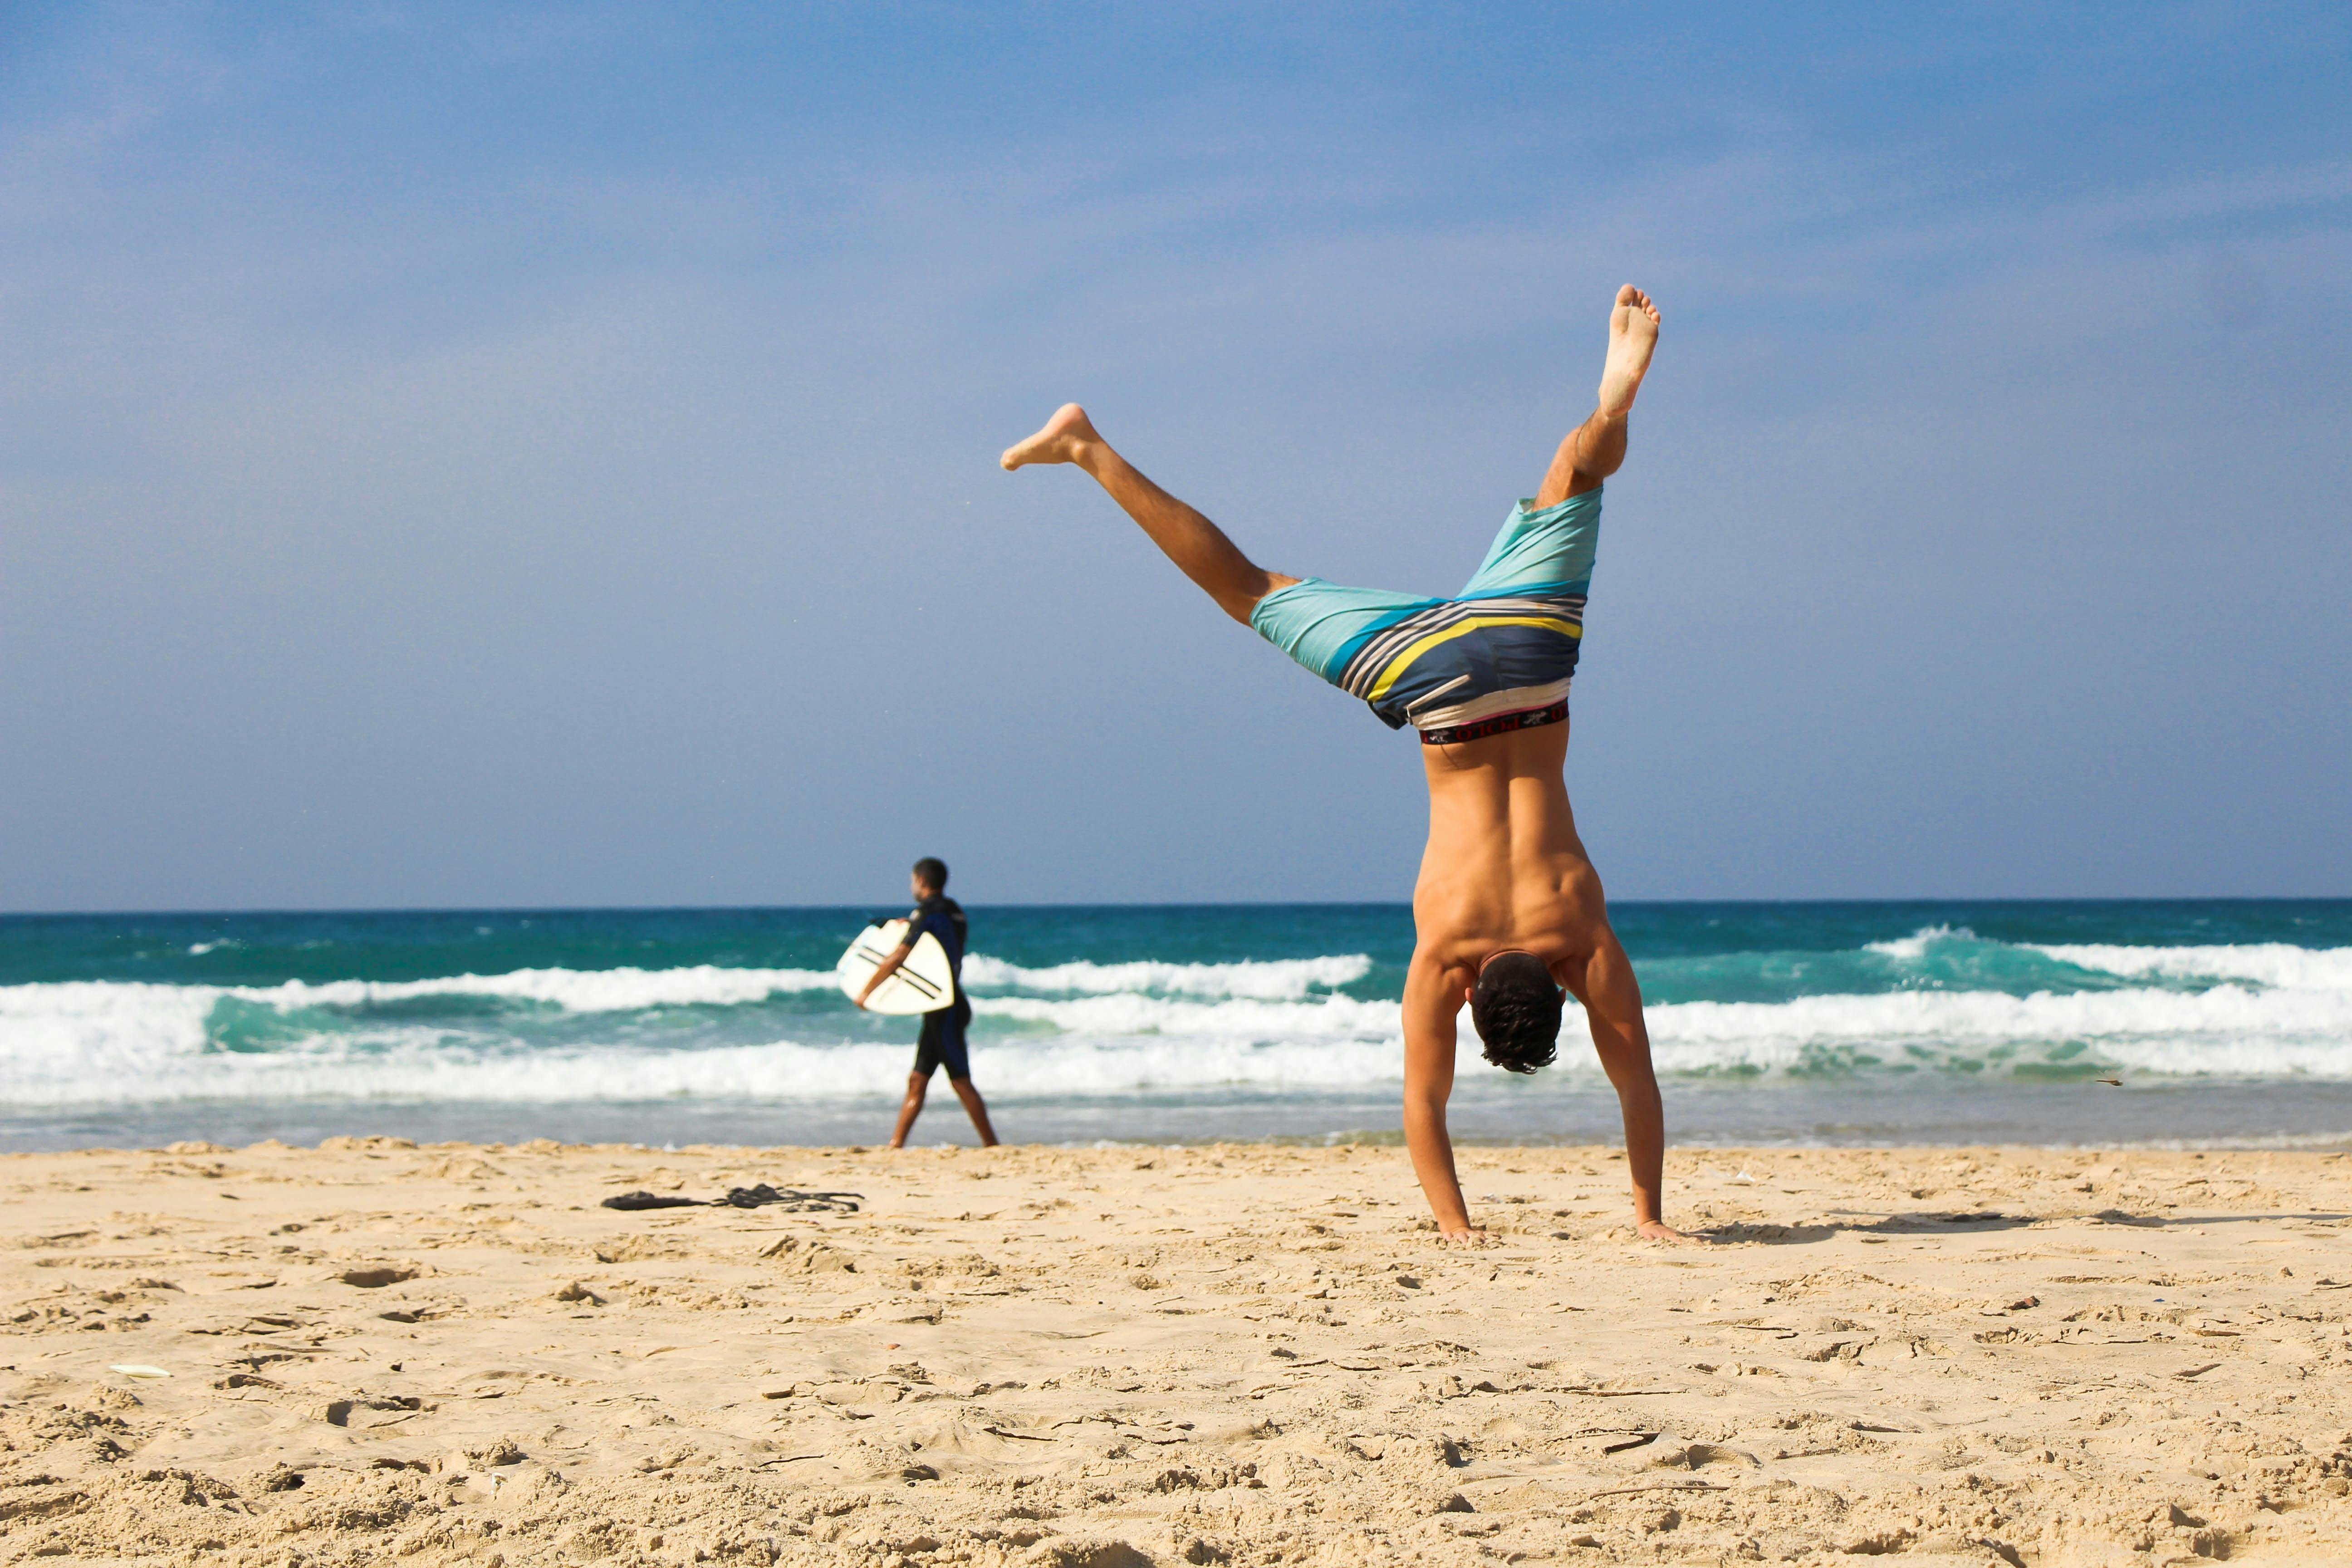 Man does a handstand on a beach | Source: Pexels